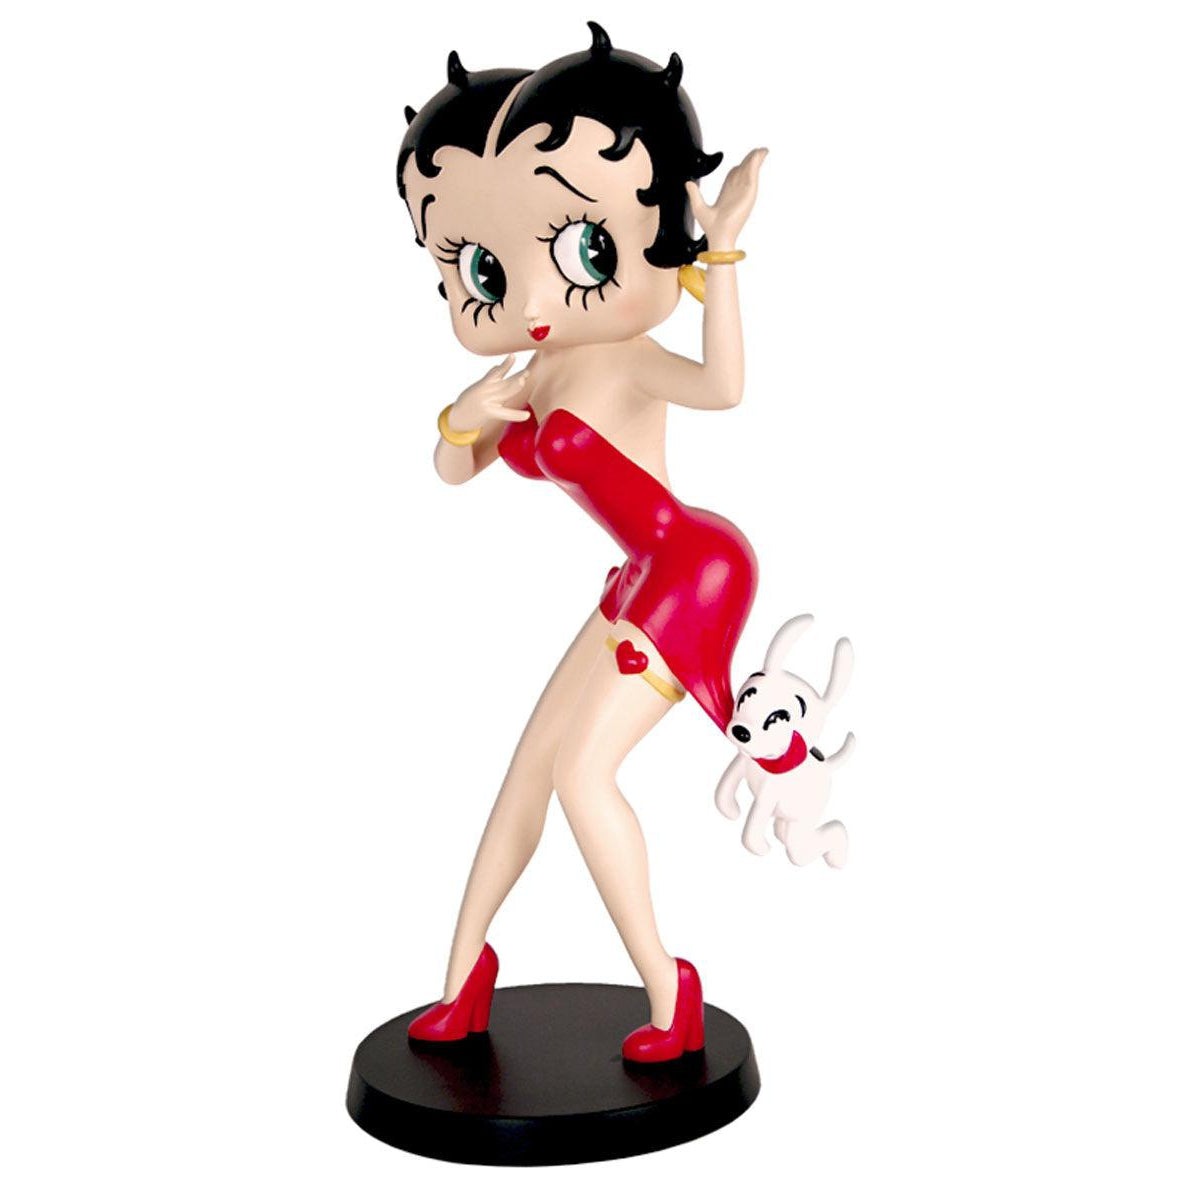 Betty Boop Being Chased (Betty Boop) - Gallery Gifts Online 